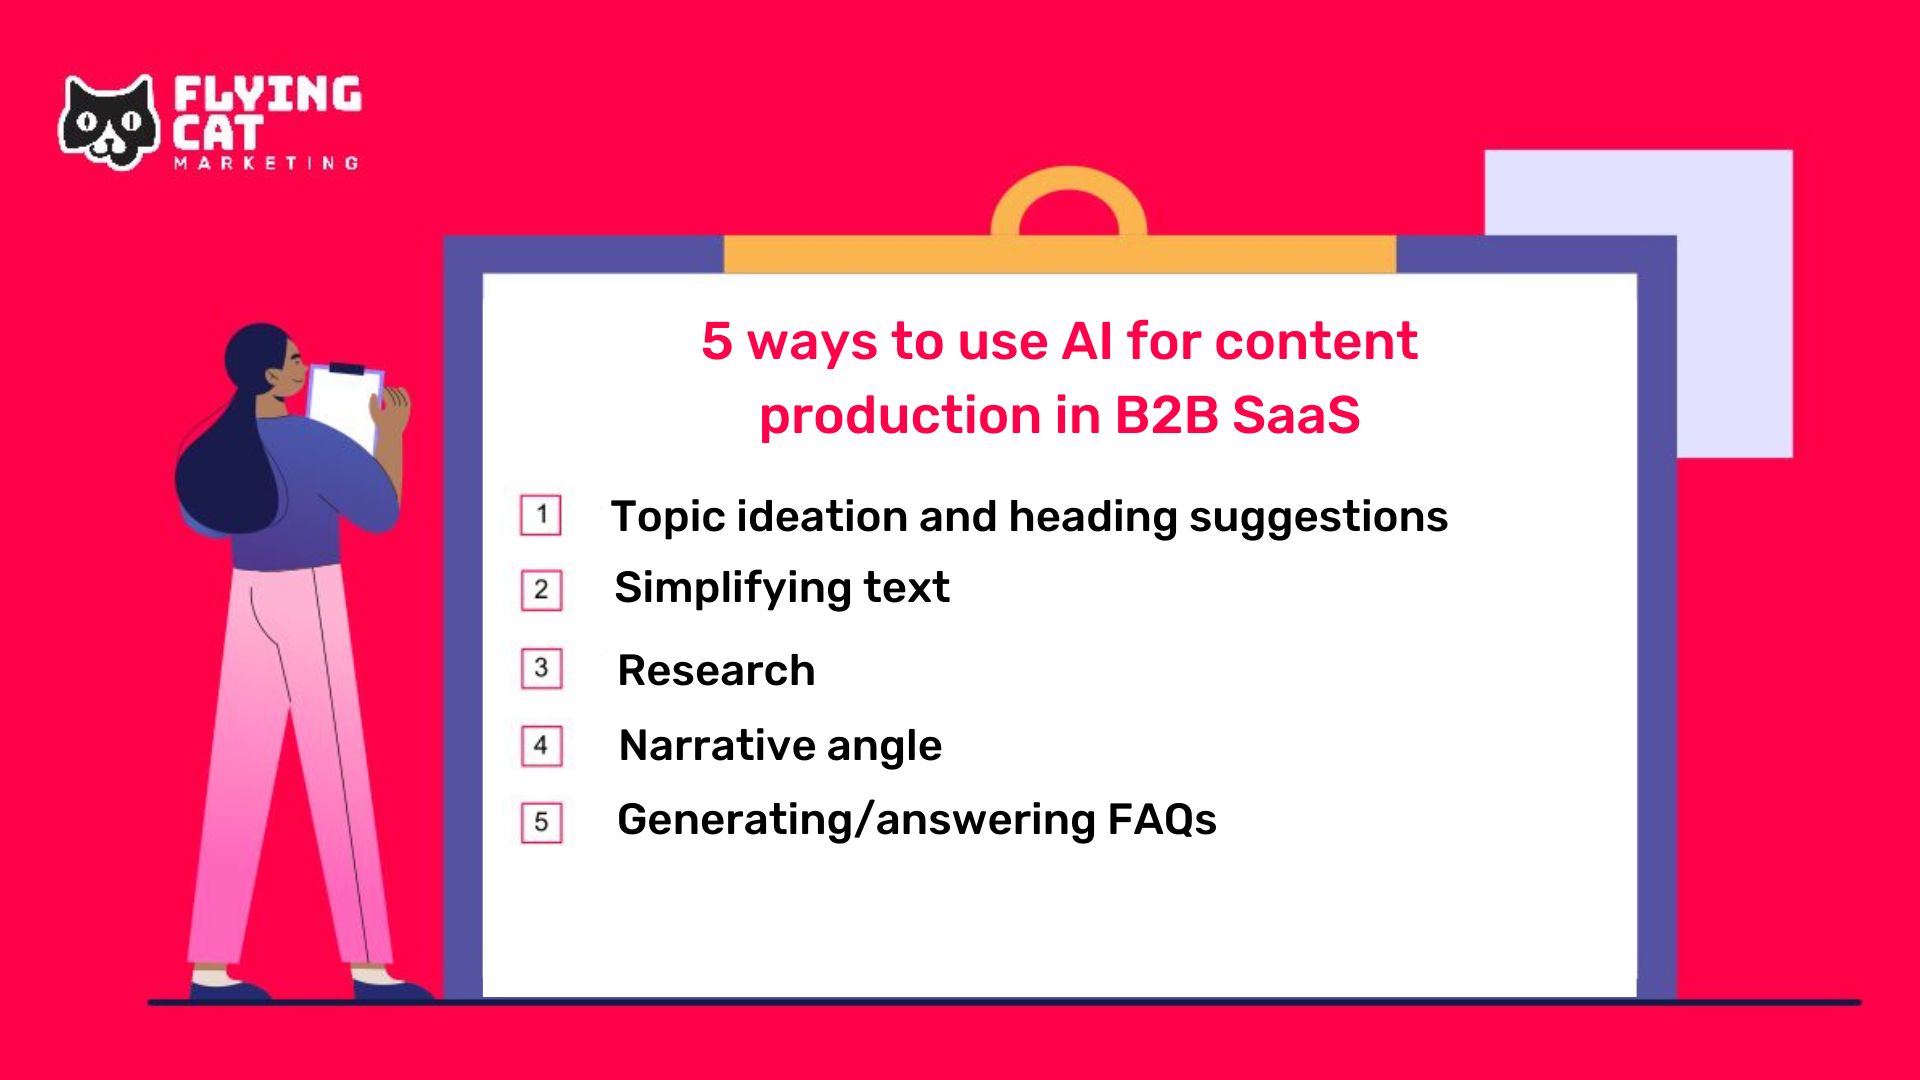 5 ways to use AI for content production in B2B SaaS